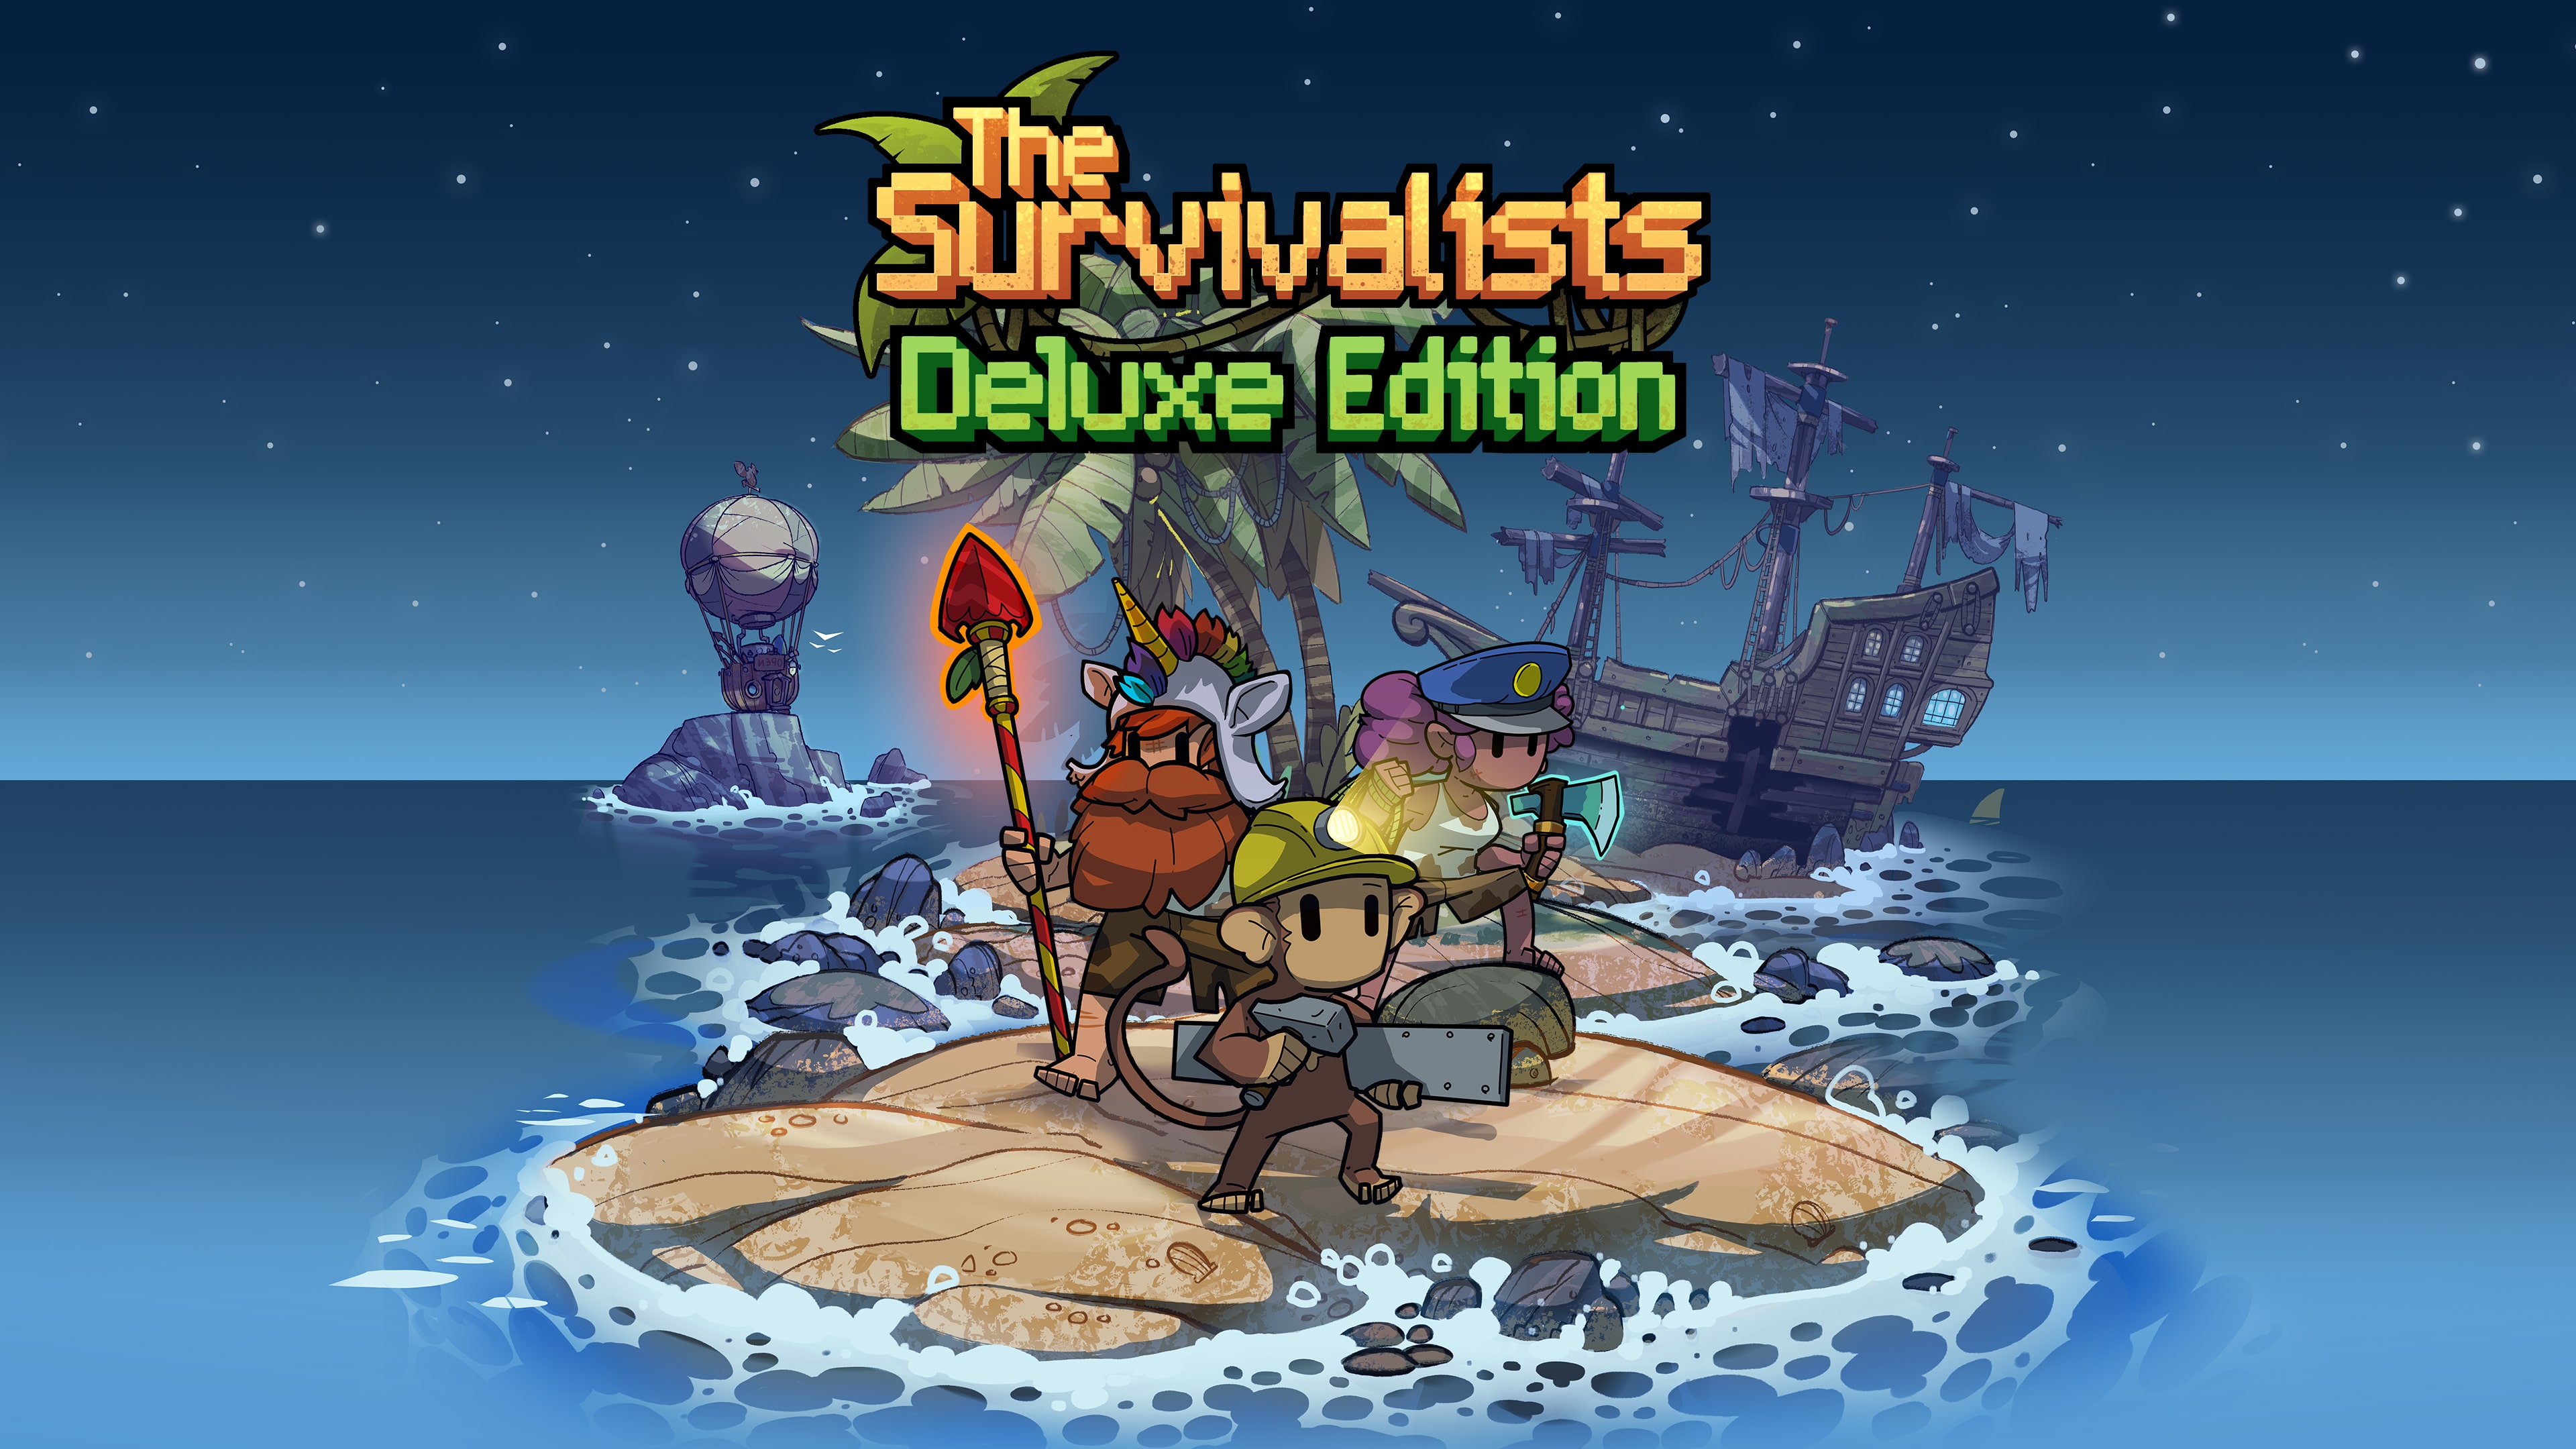 The Survivalists - Deluxe Edition (Simplified Chinese, English, Korean, Japanese, Traditional Chinese)